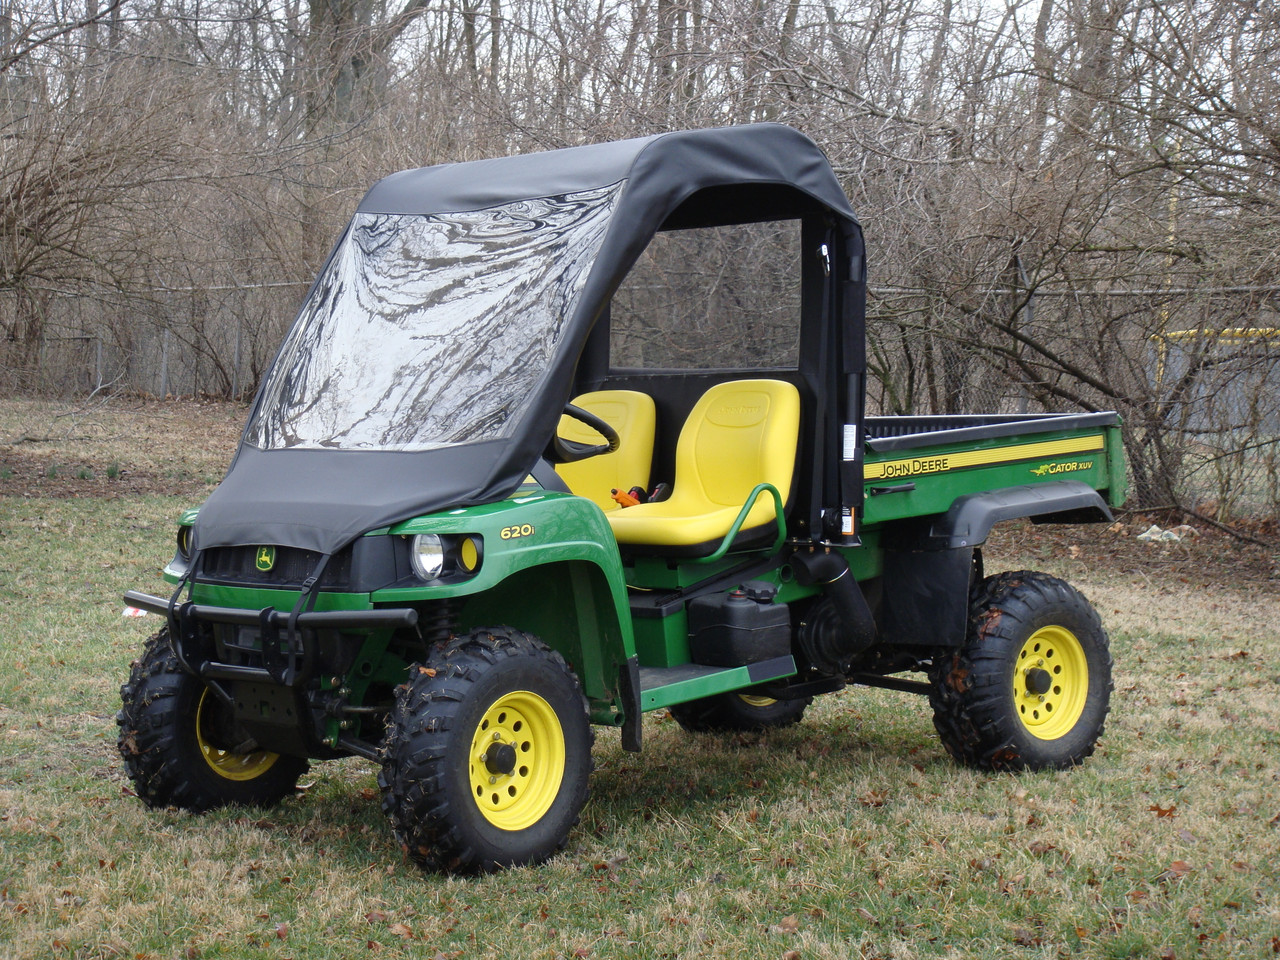 3 Star side x side John Deere HPX/XUV vinyl windshield, top and rear window side and front angle view